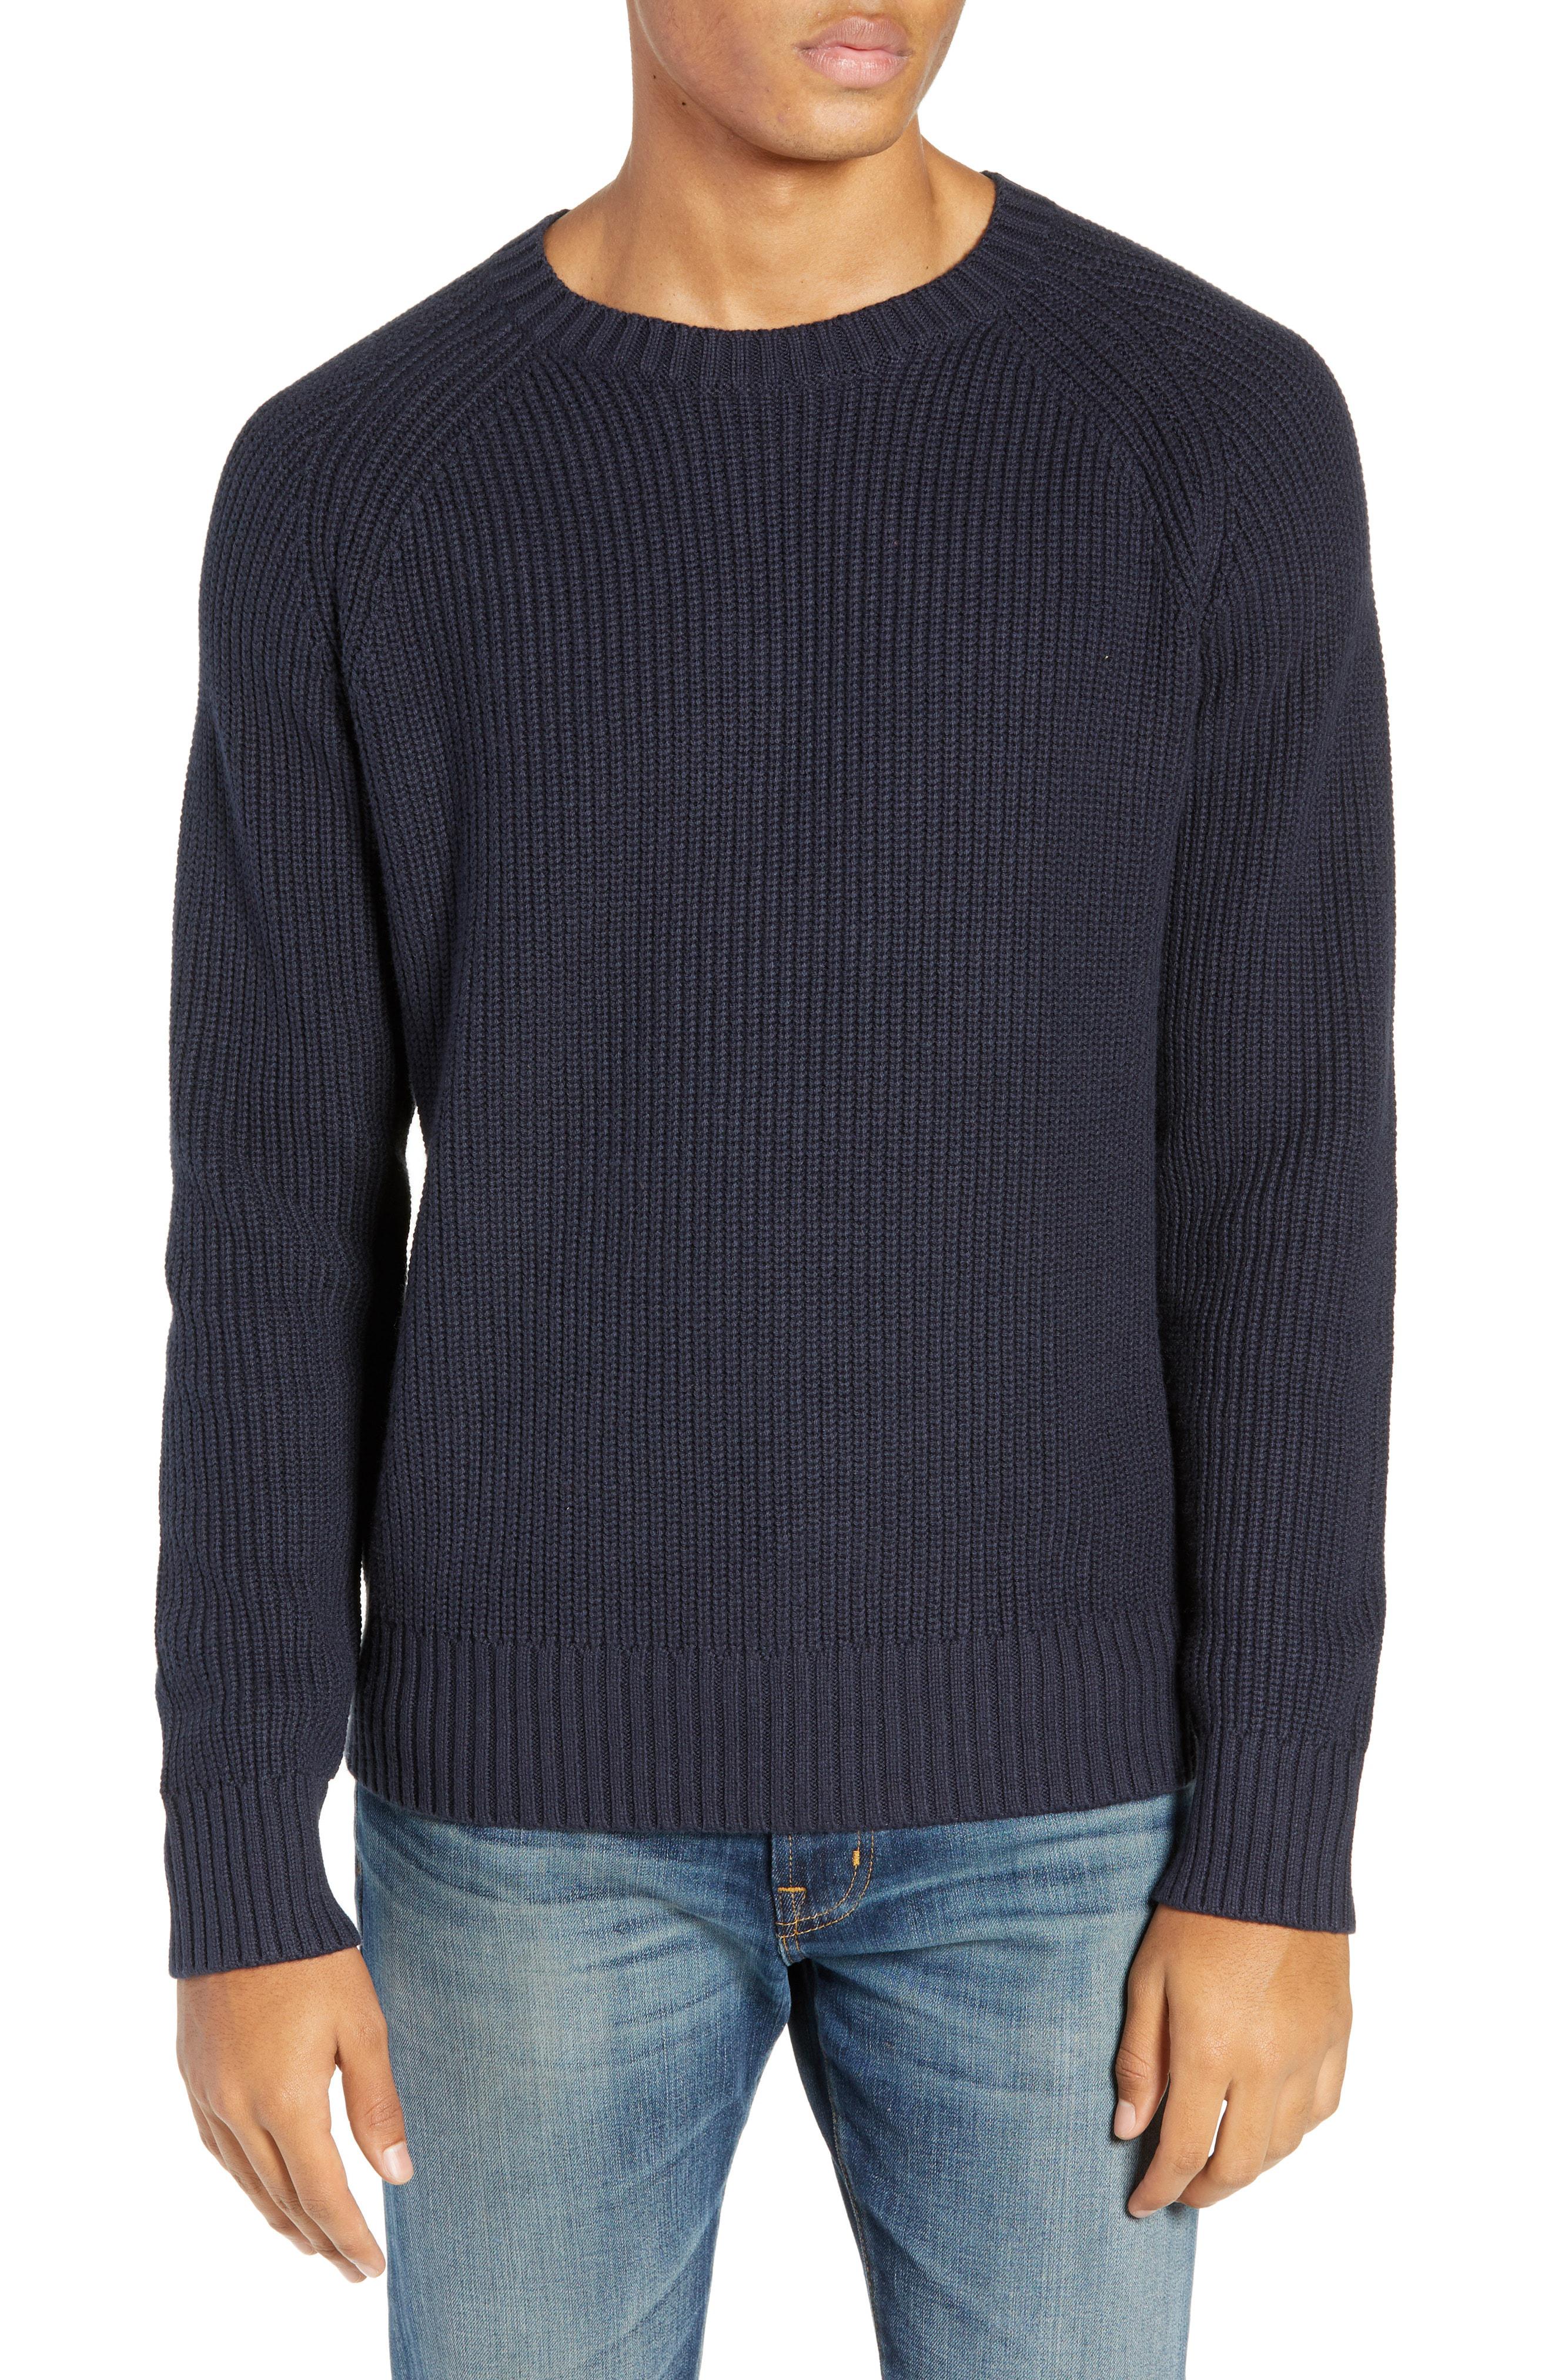 Lyst - Bonobos Slim Fit Cotton & Cashmere Sweater in Blue for Men